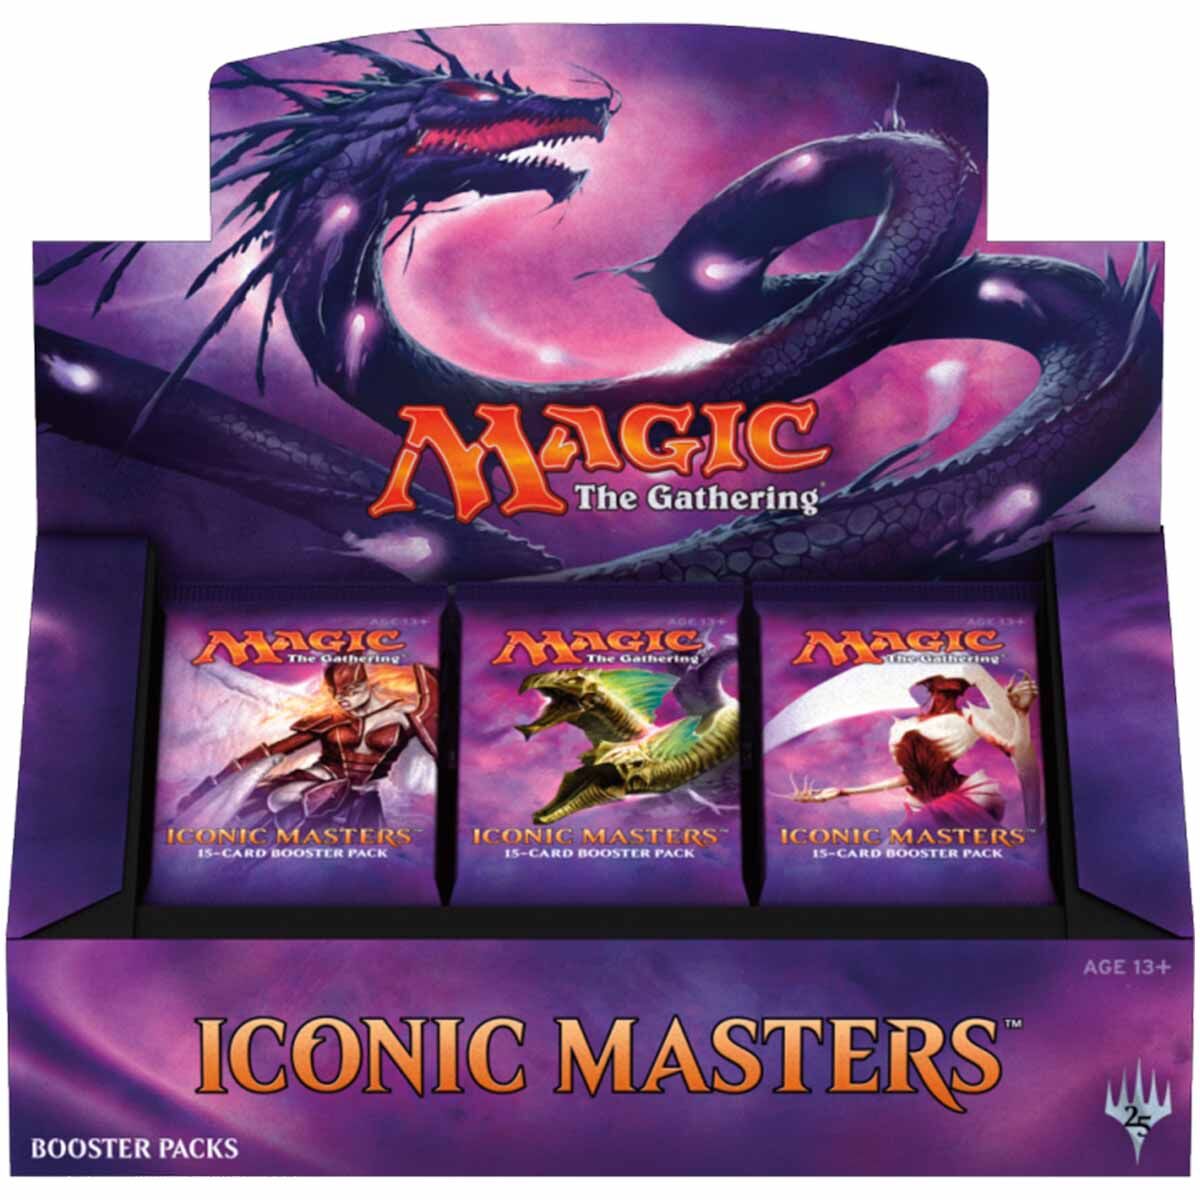 Iconic Masters Booster Box - Magic the Gathering